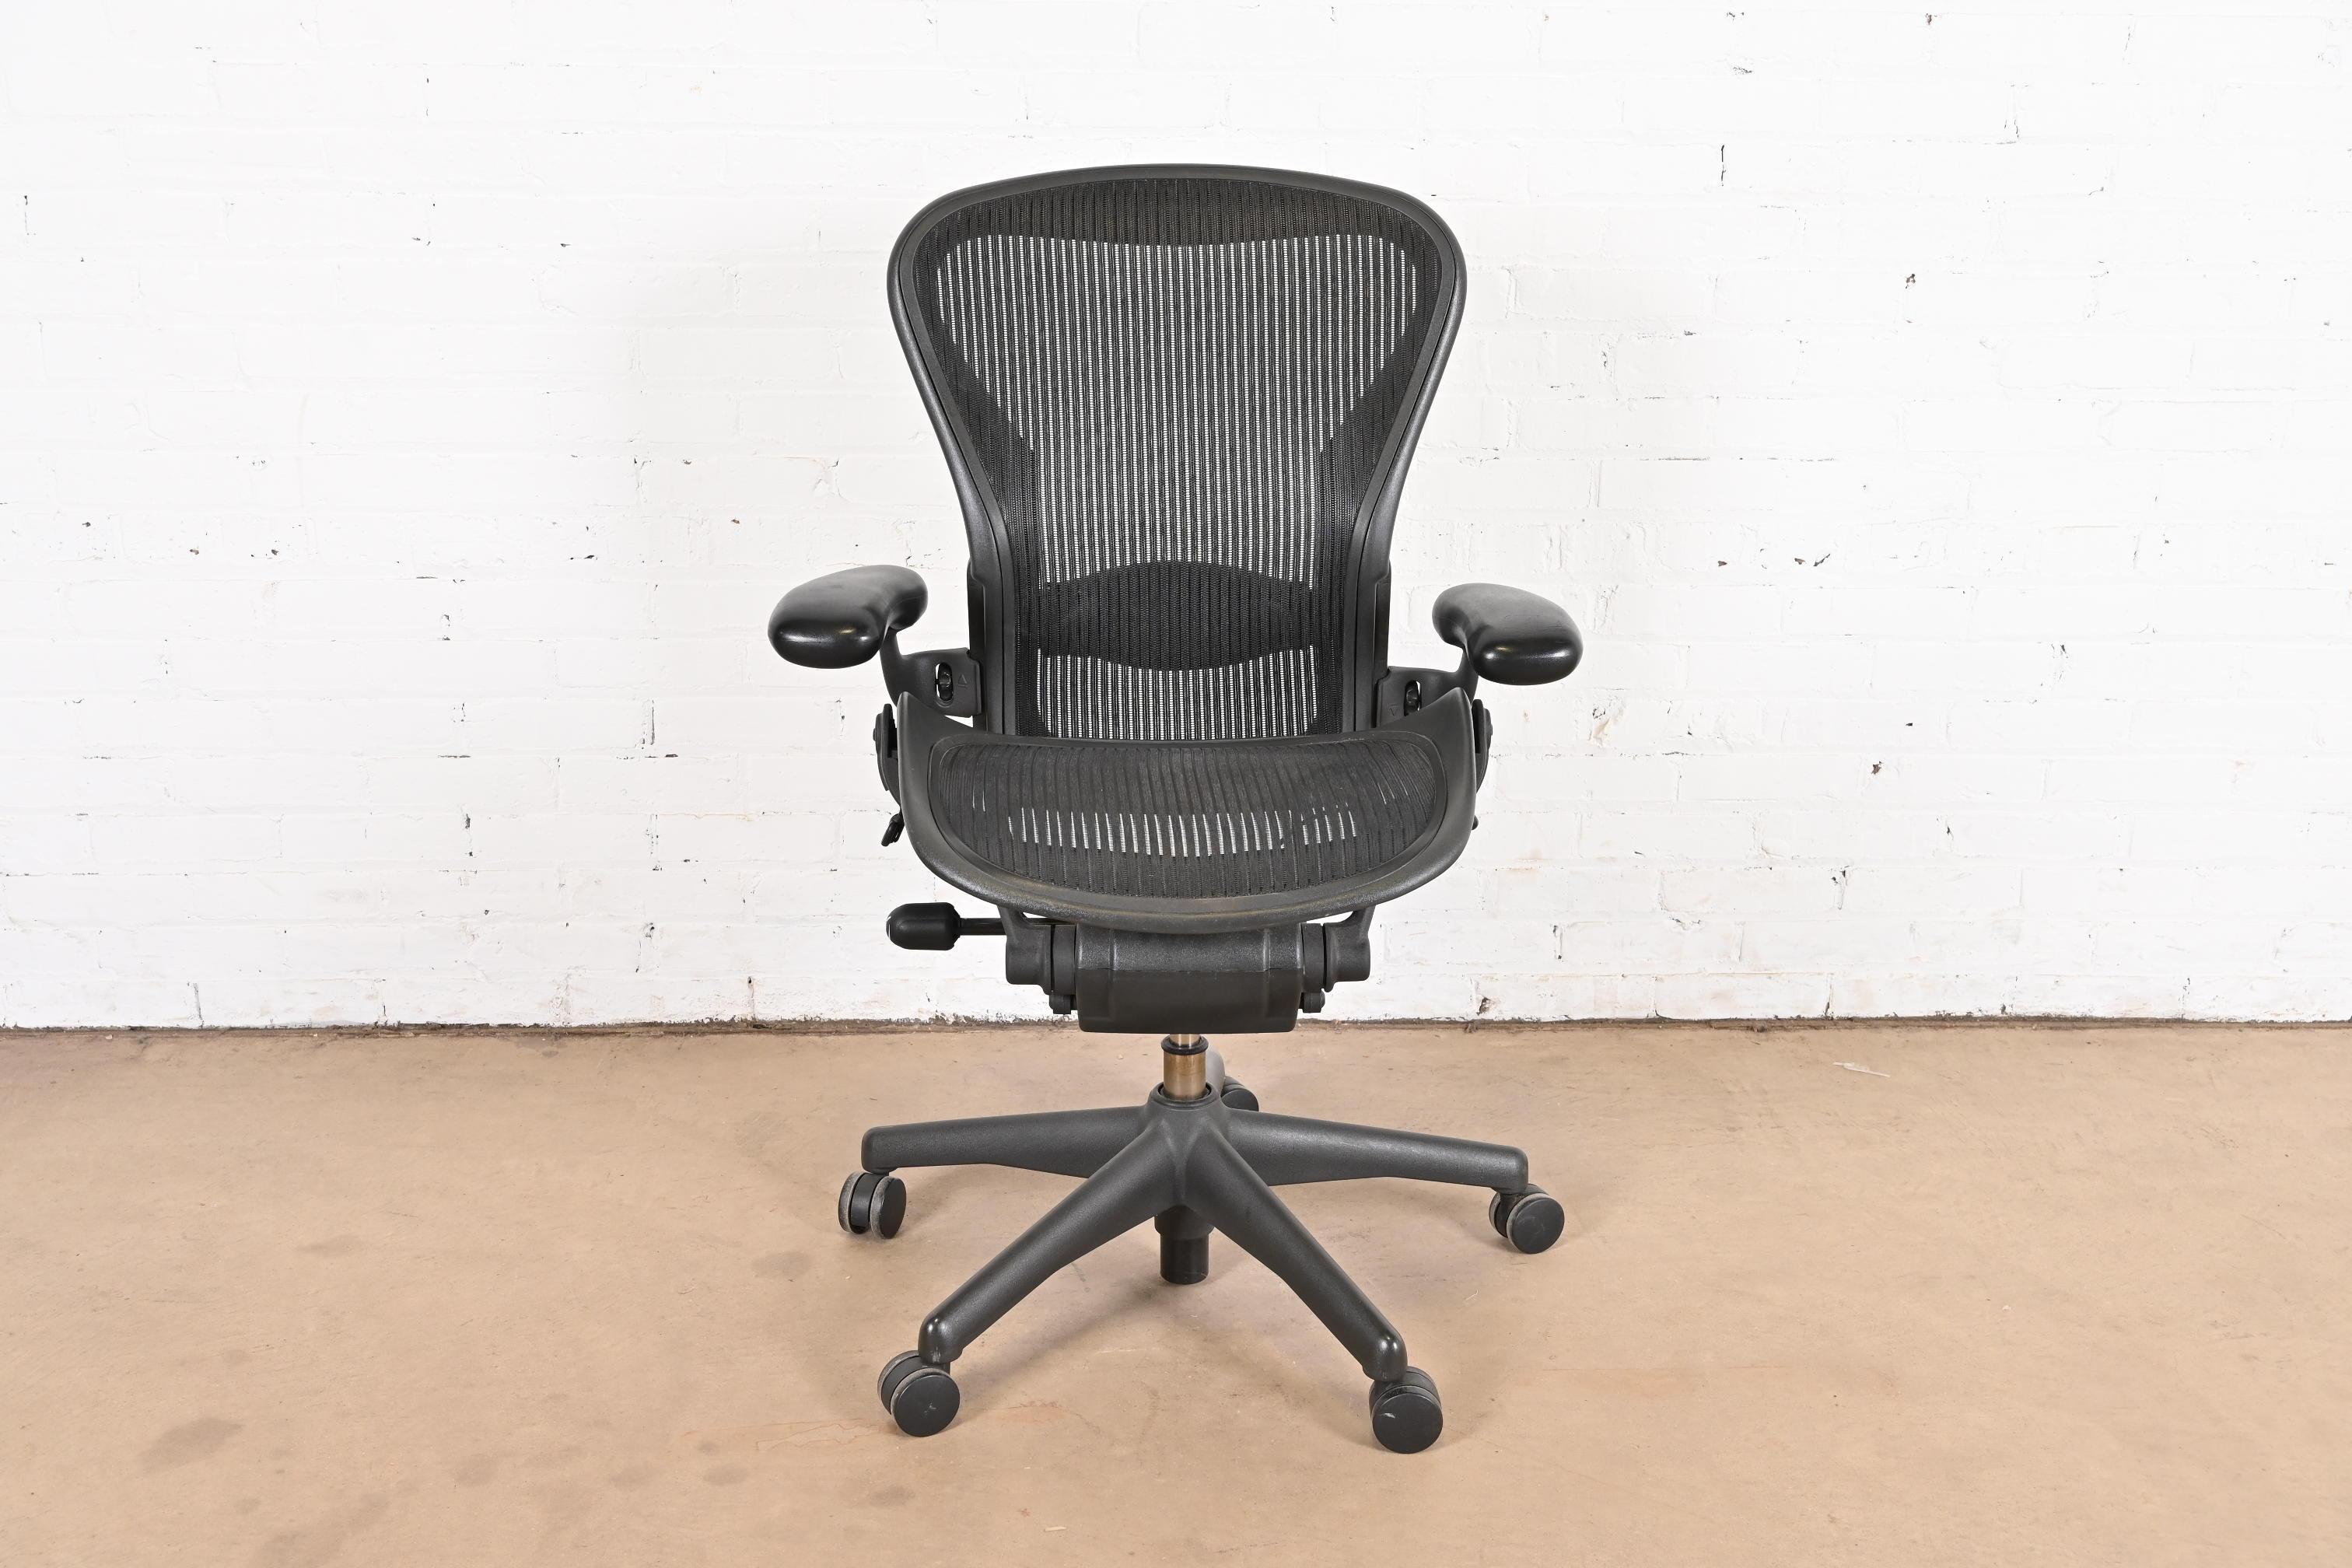 A classic and very comfortable tilting and swiveling Aeron office desk chair

By Herman Miller

USA, 1990s

Measures: 26.5